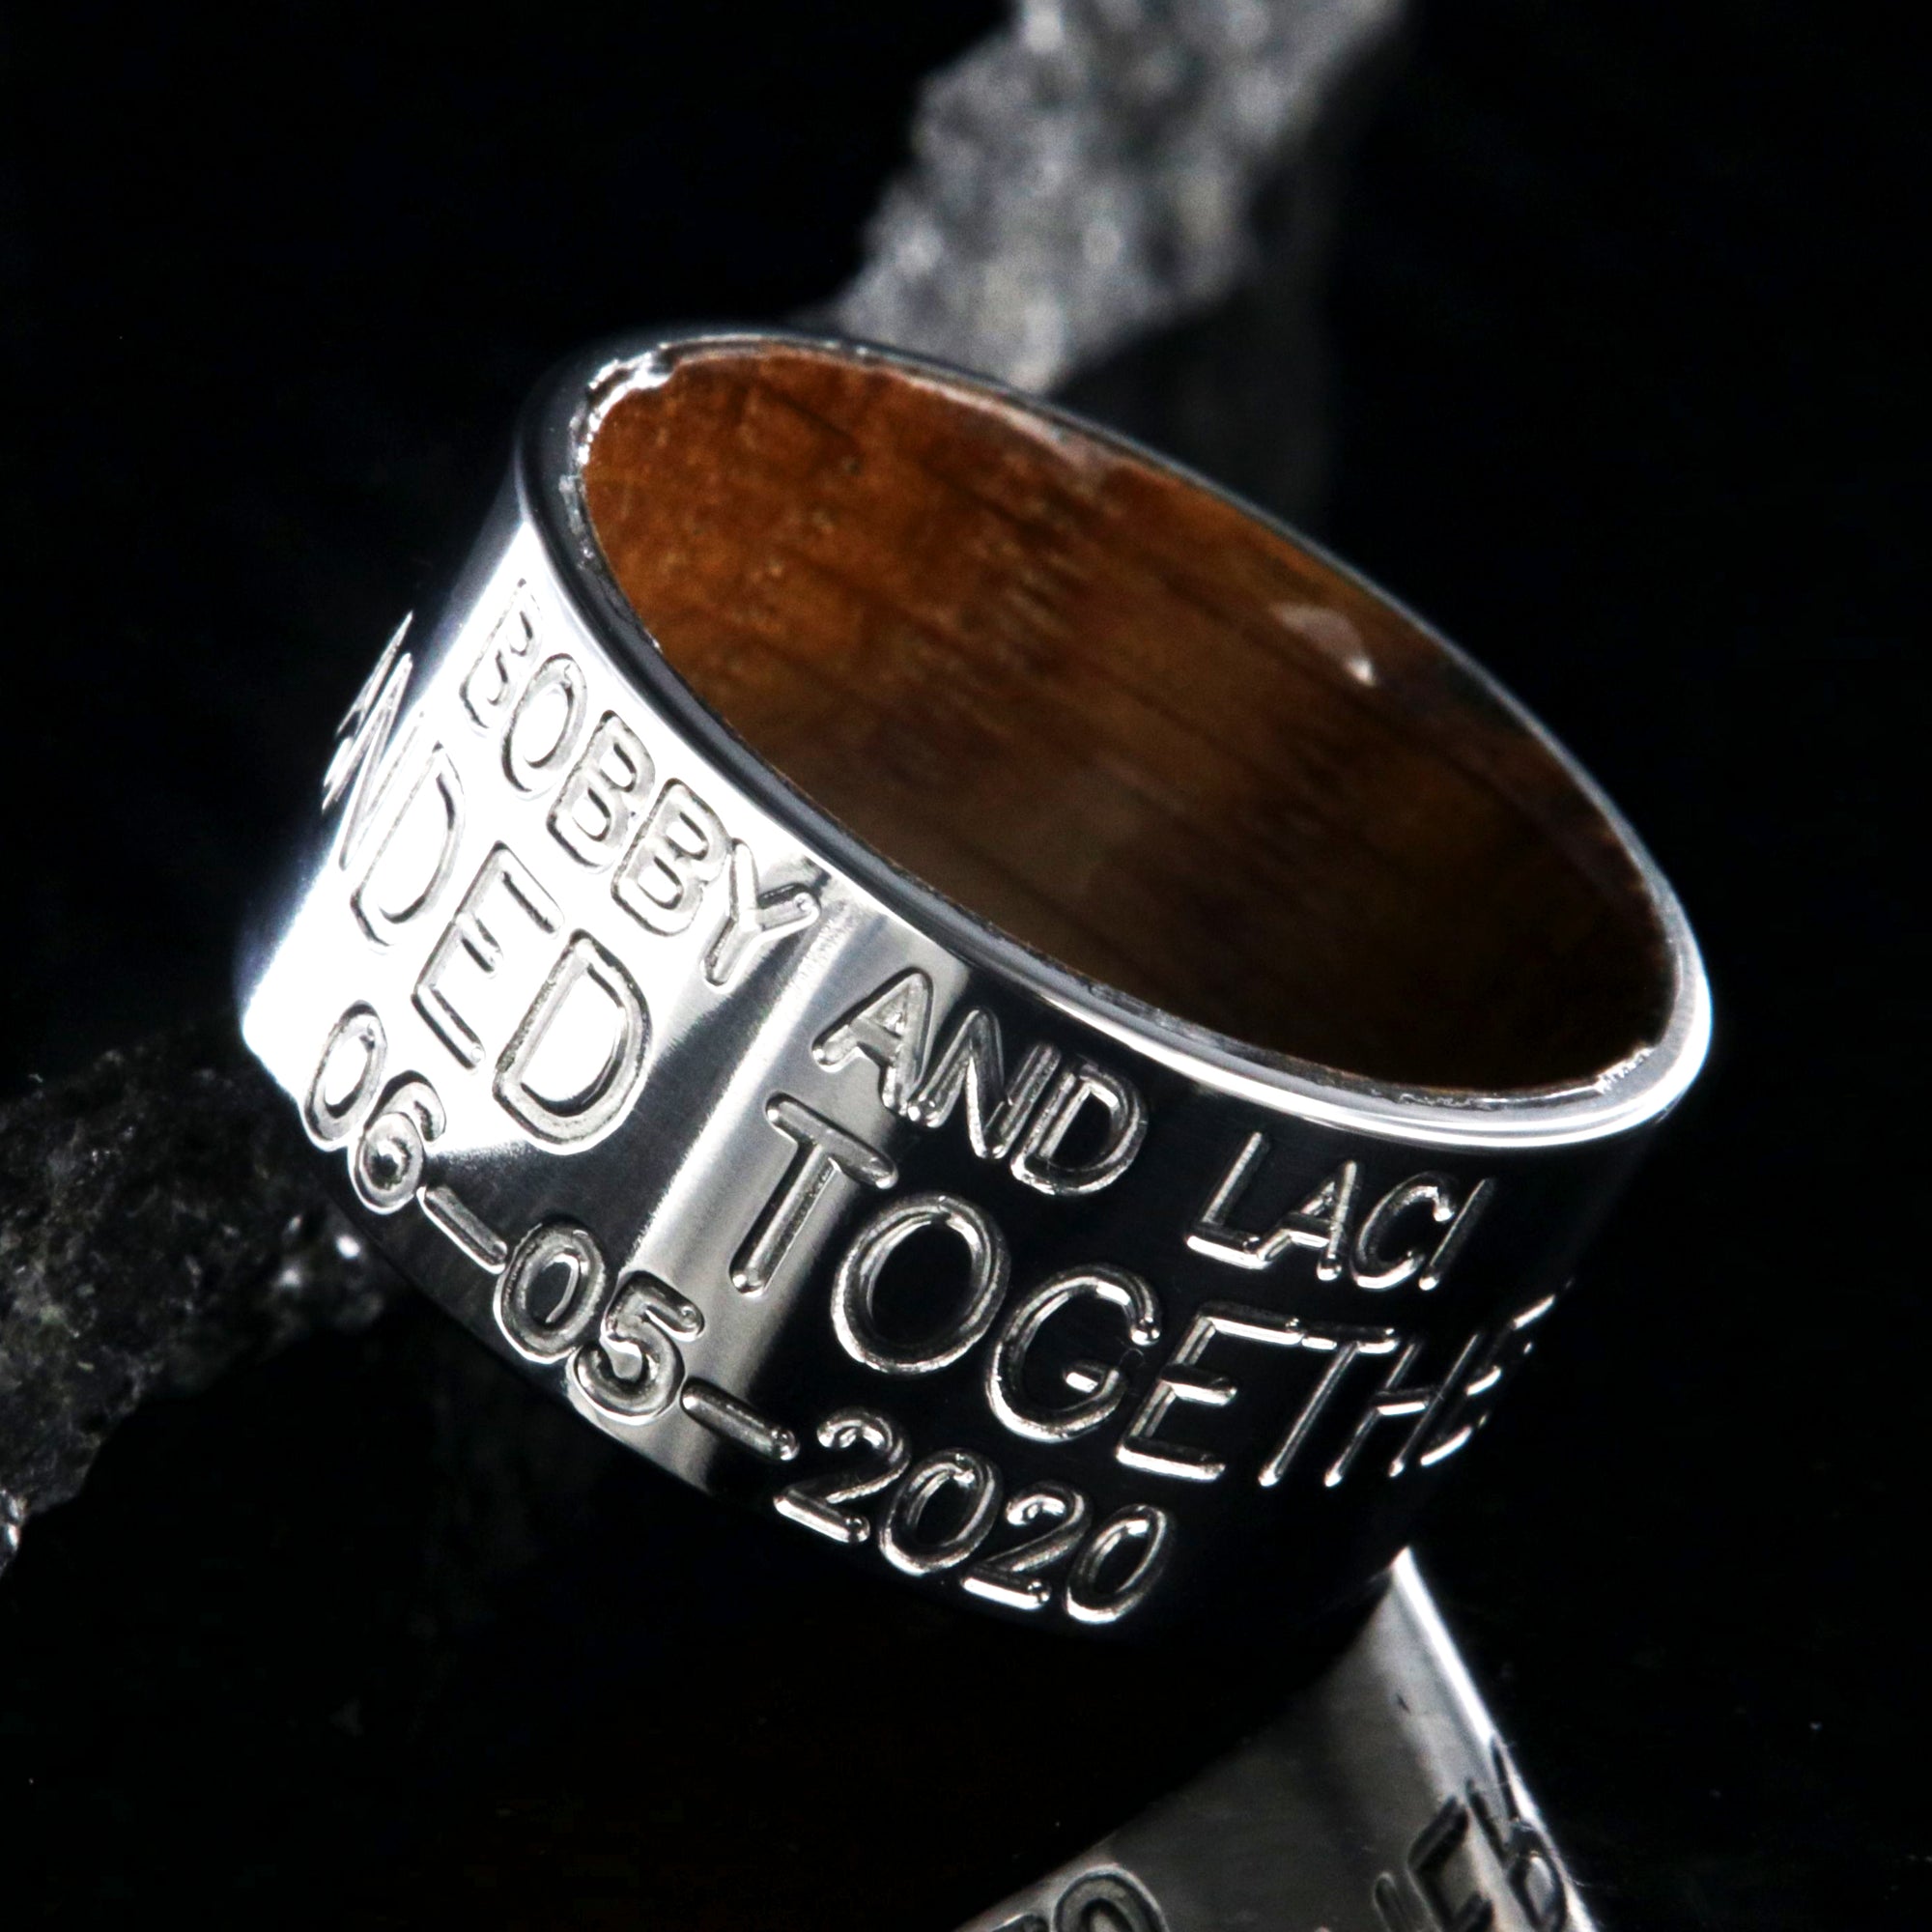 12mm wide titanium wedding band, duck band, 3 lines of custom text and a polished whiskey barrel sleeve